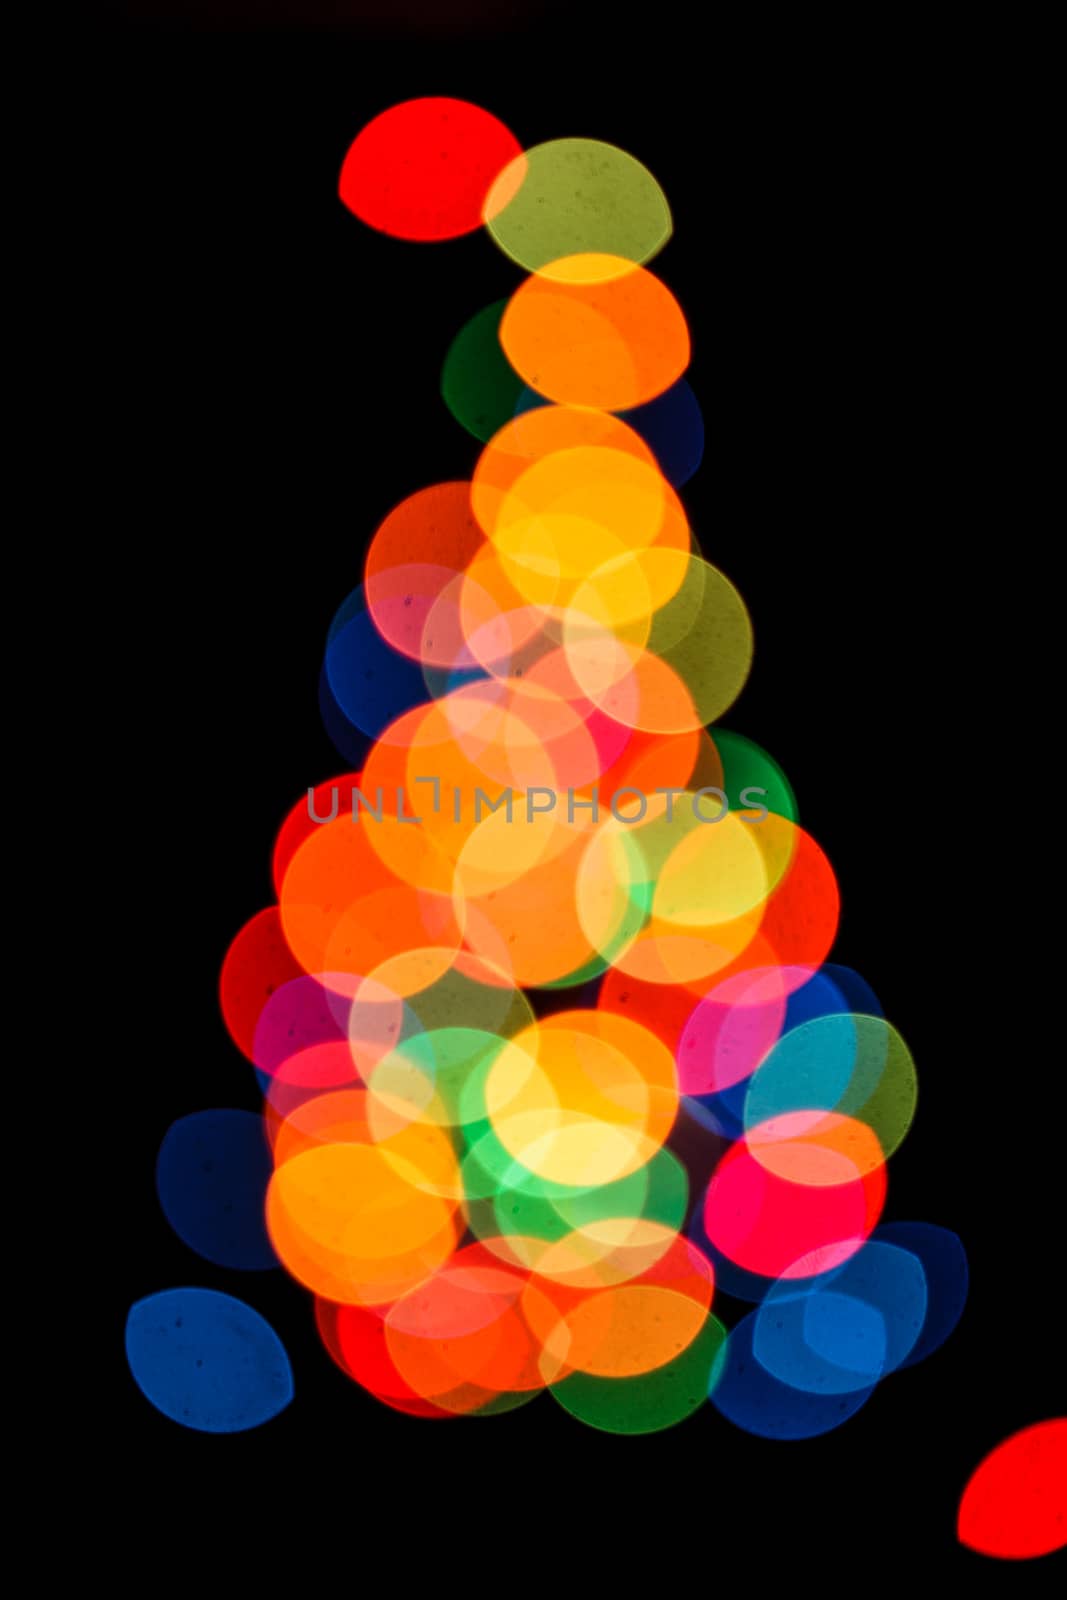 Silhouette of Christmas tree by oksix